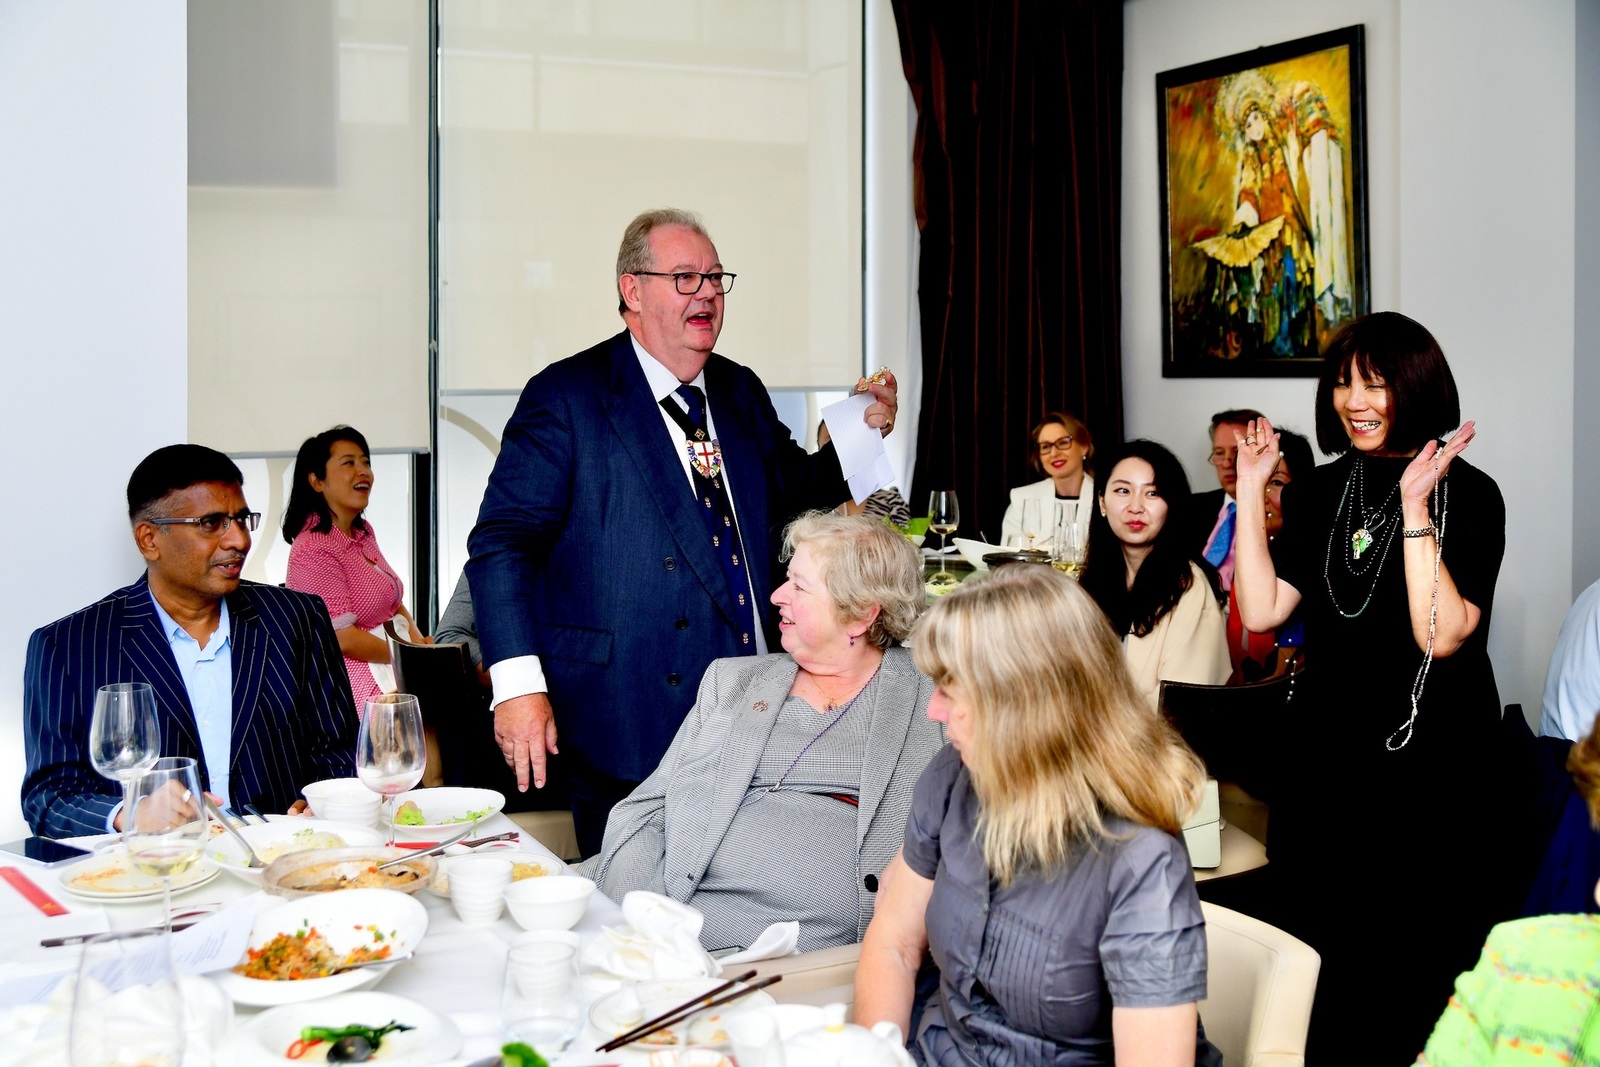 Guest Auctioneer at the Women in the Livery Annual Lunch 